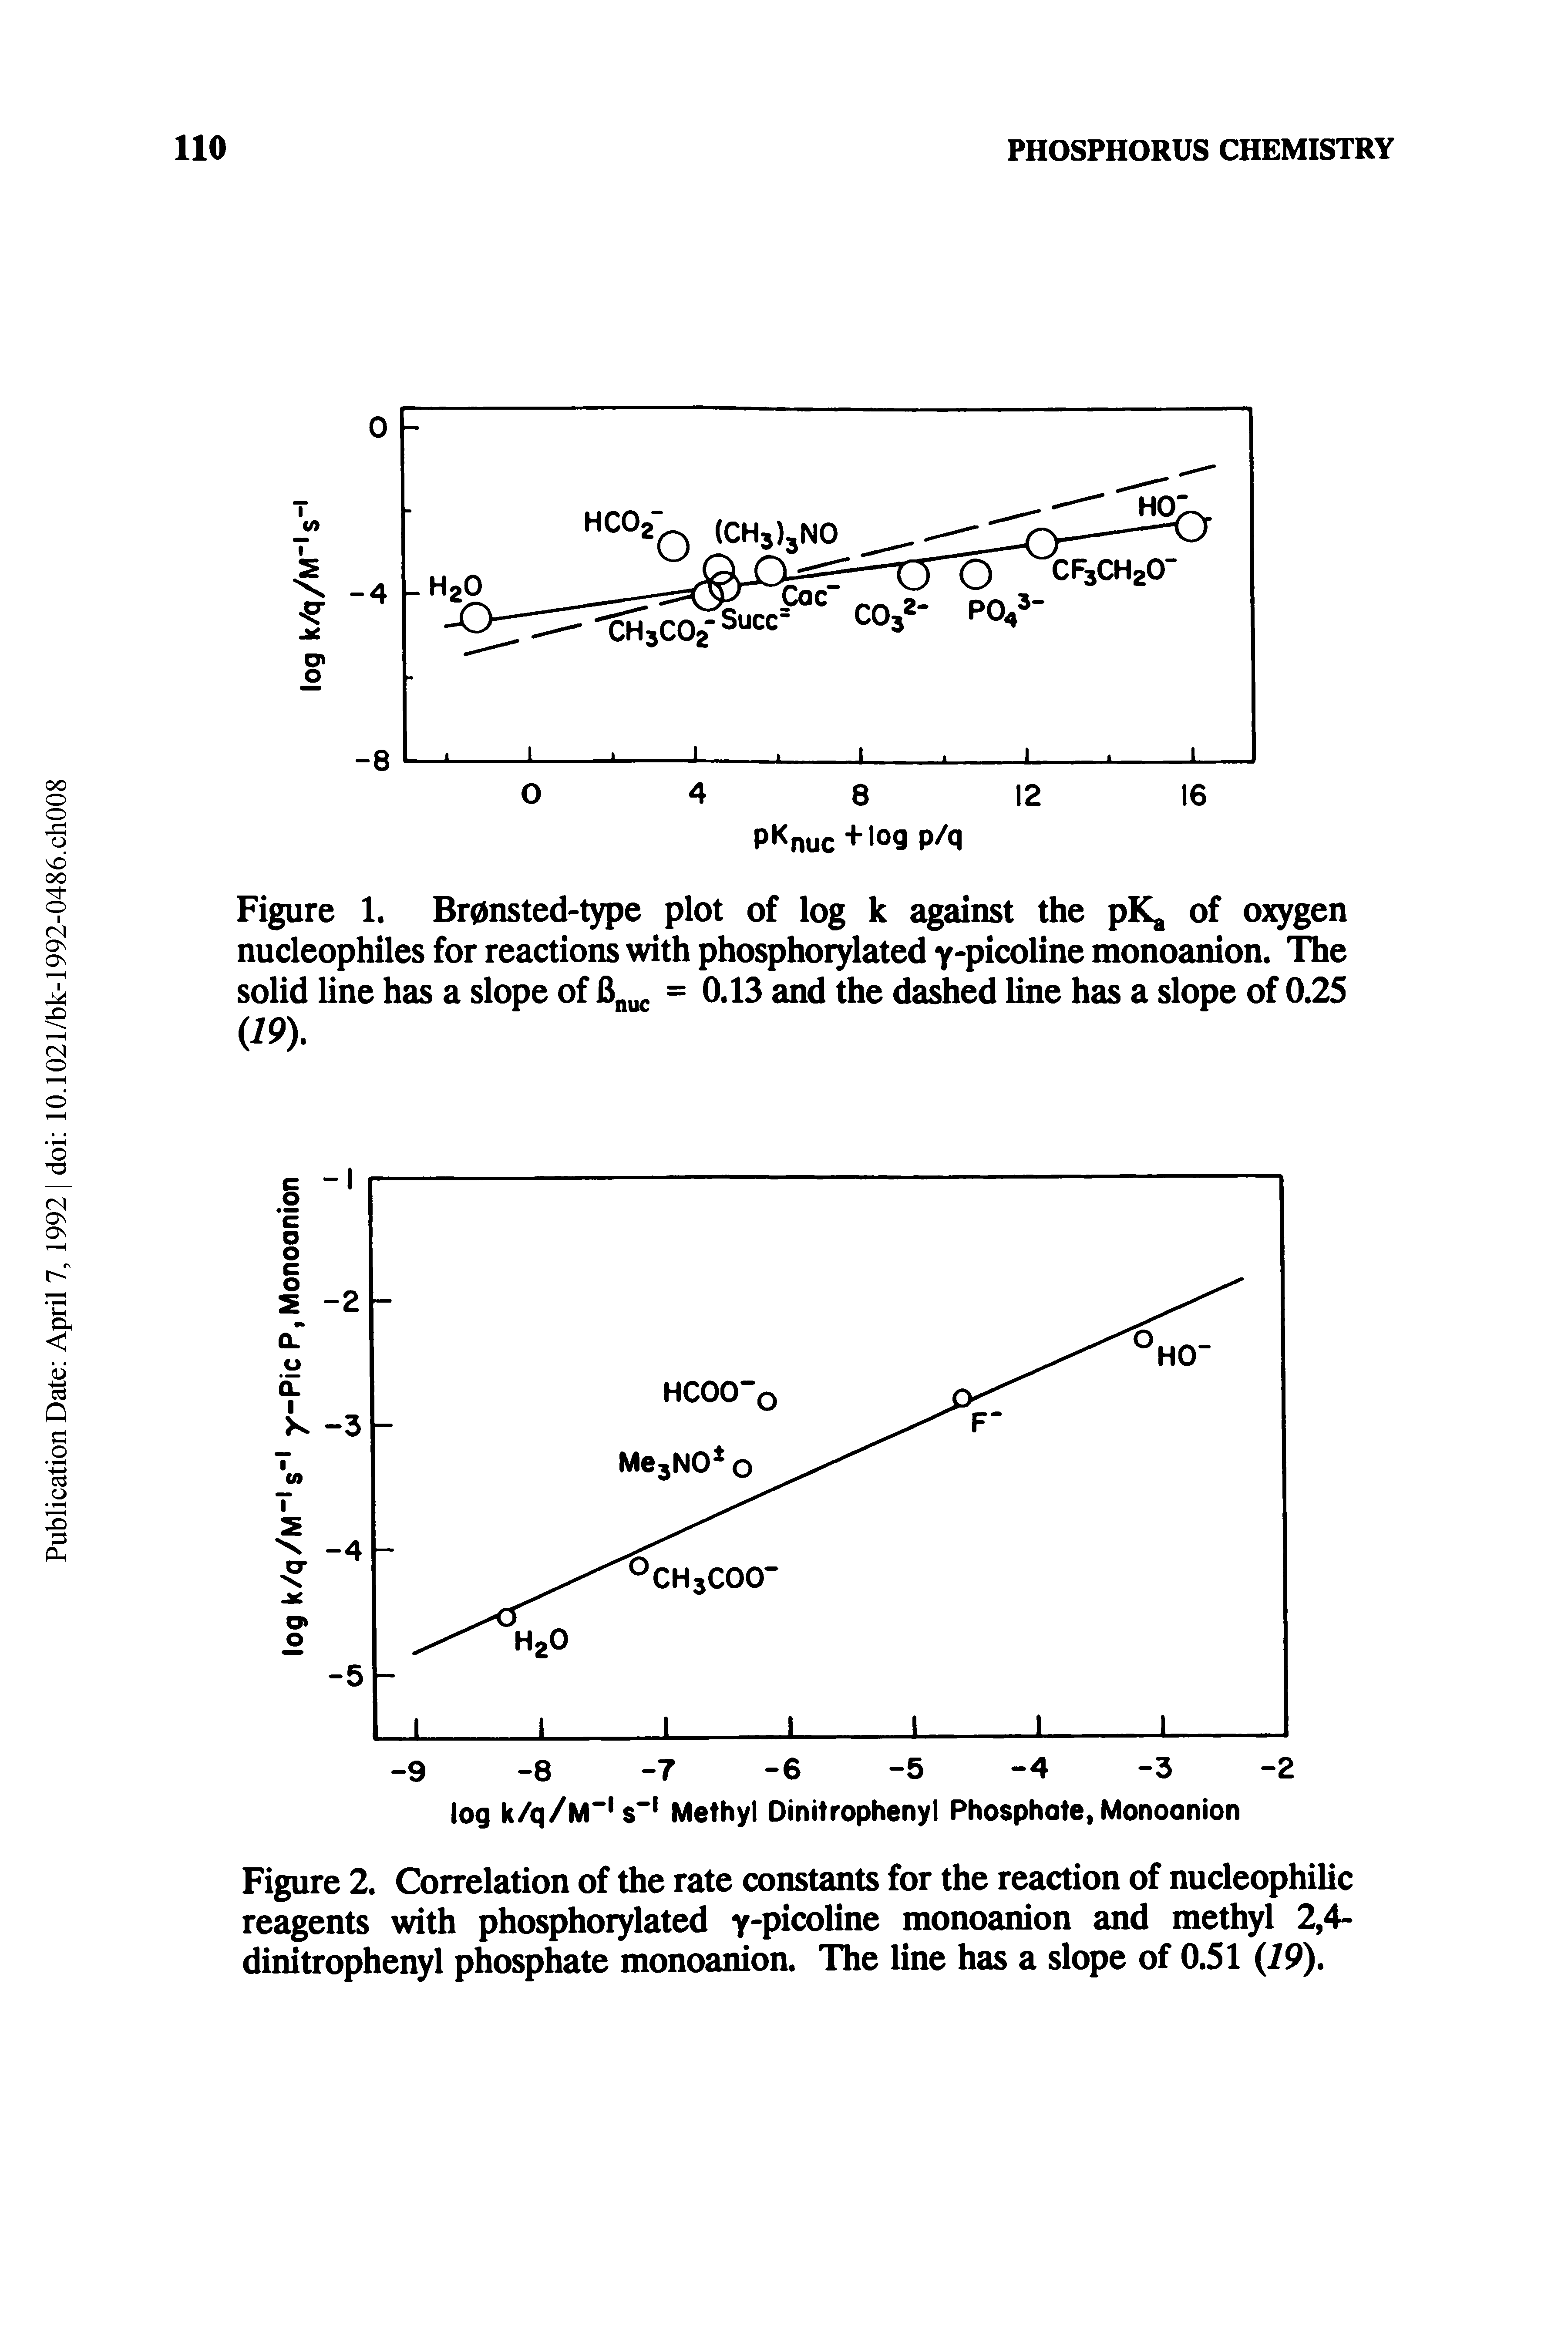 Figure 2. Correlation of the rate constants for the reaction of nucleophilic reagents with phosphorylated y-picoline monoanion and methyl 2,4-dinitrophenyl phosphate monoanion. The line has a slope of 0.51 (79).